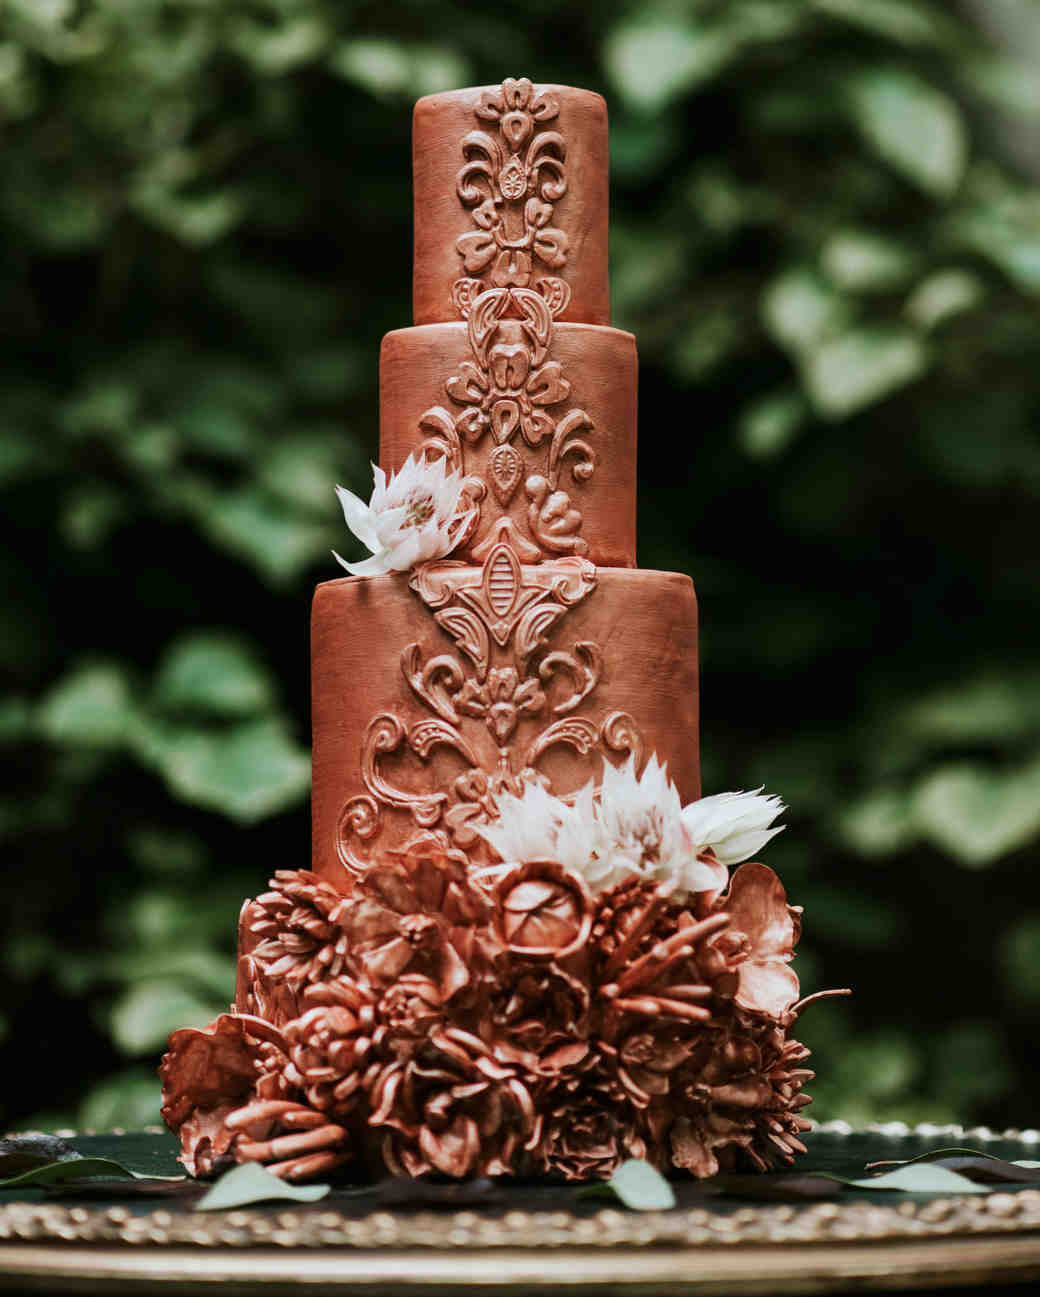 For a less conventional wedding cake